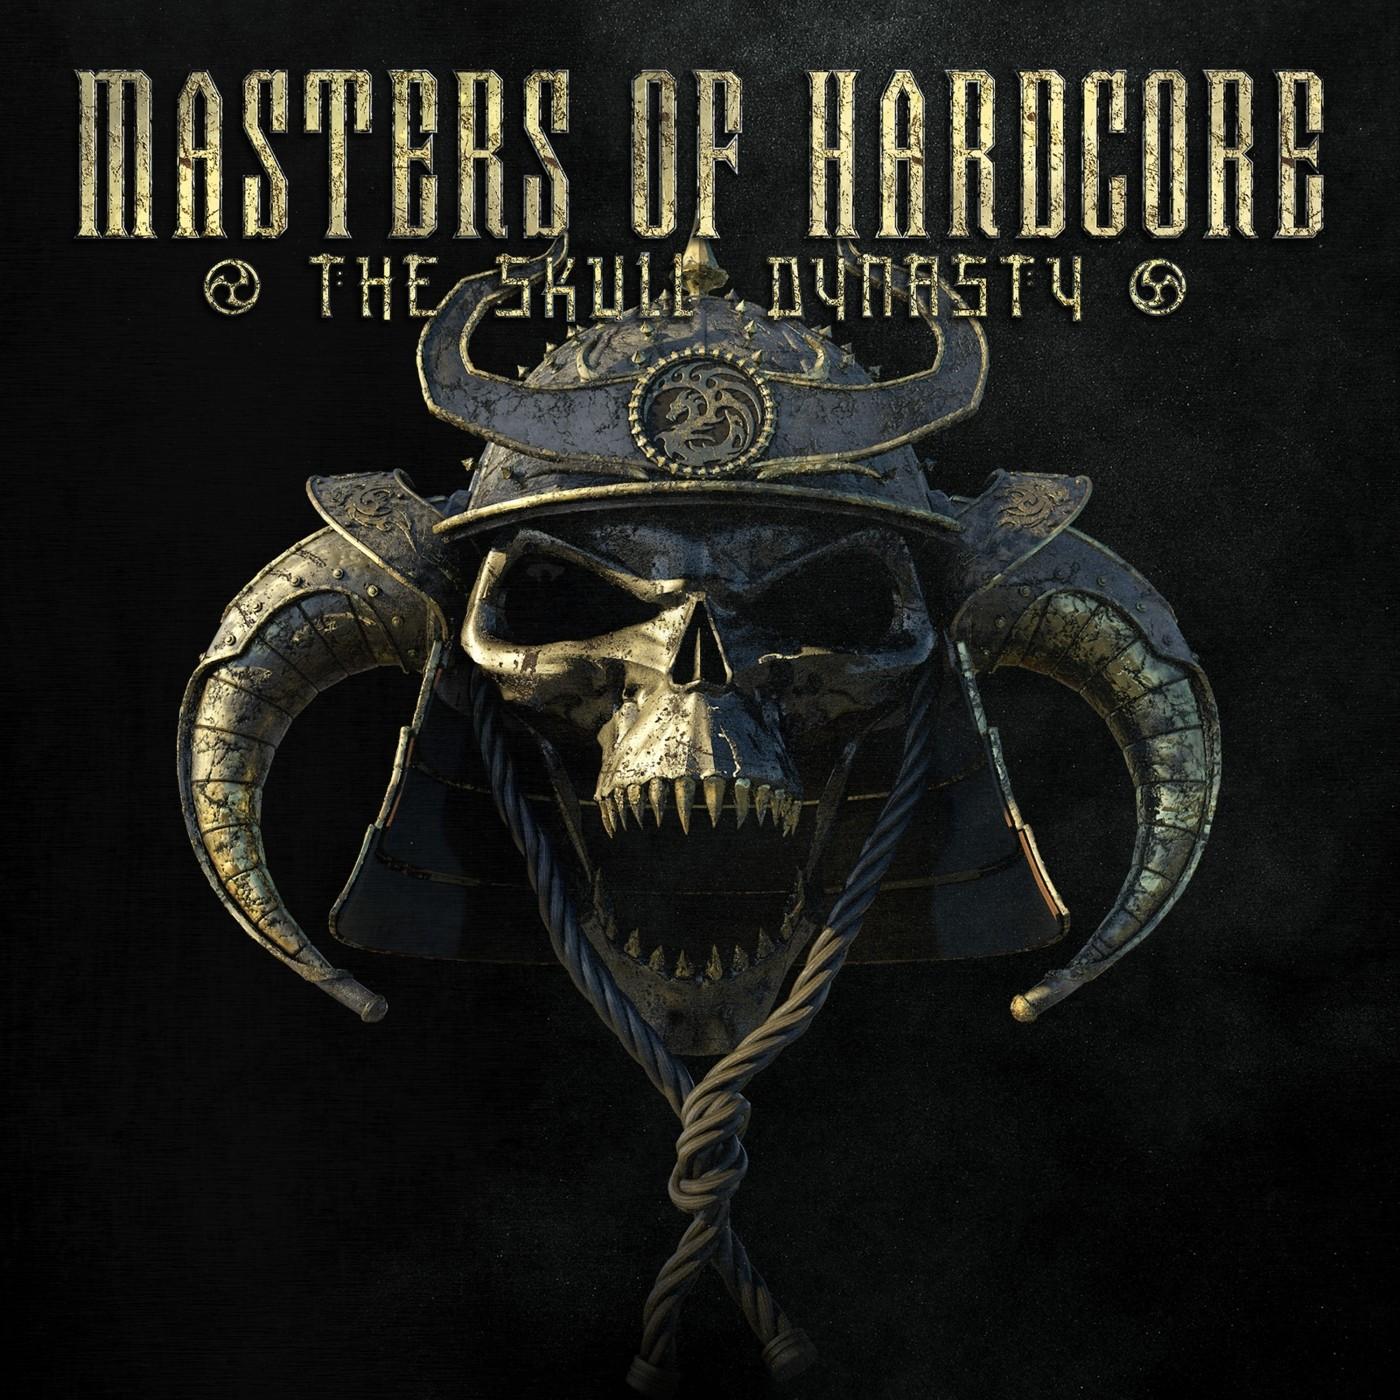 Masters Of Hardcore clothing, music and merchandise